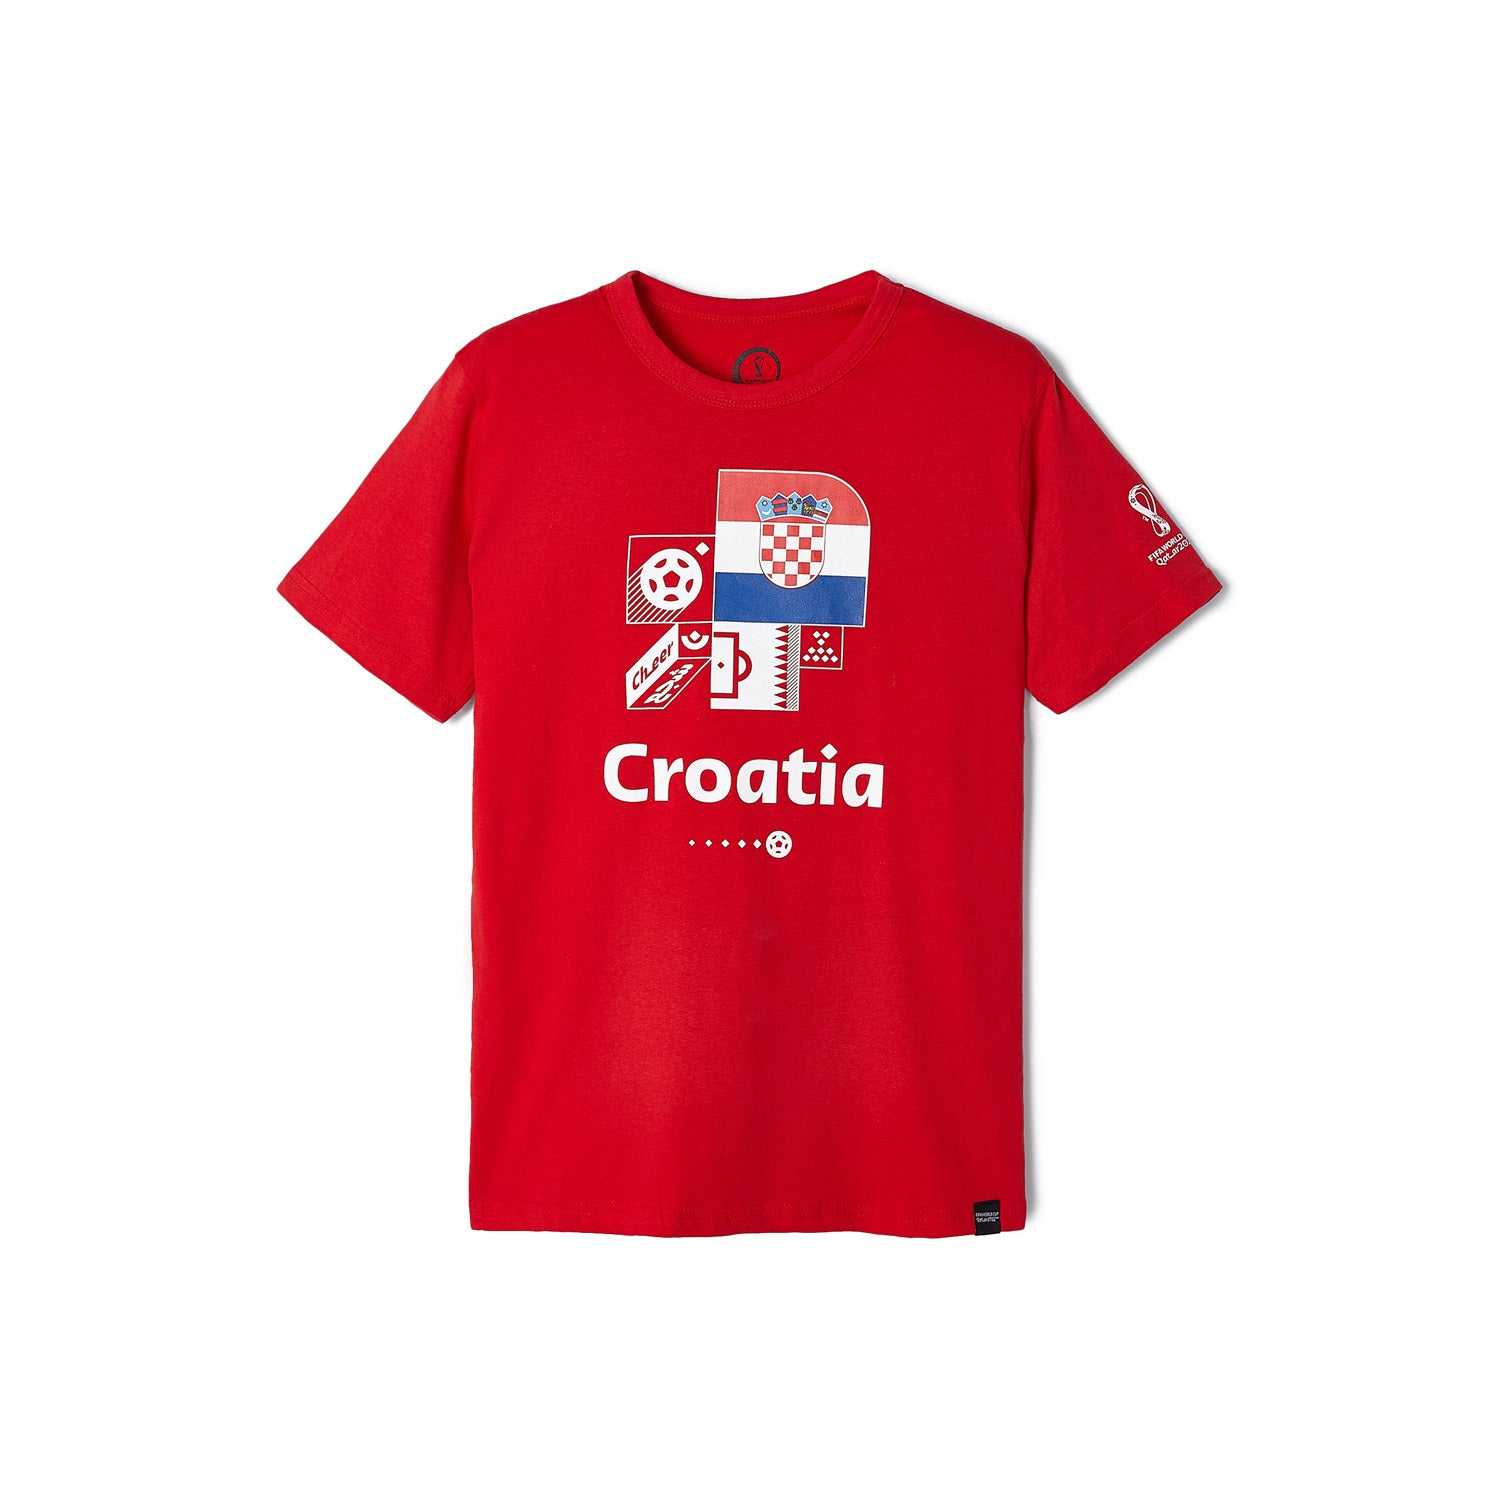 2022 World Cup Croatia Red T-Shirt - Youth